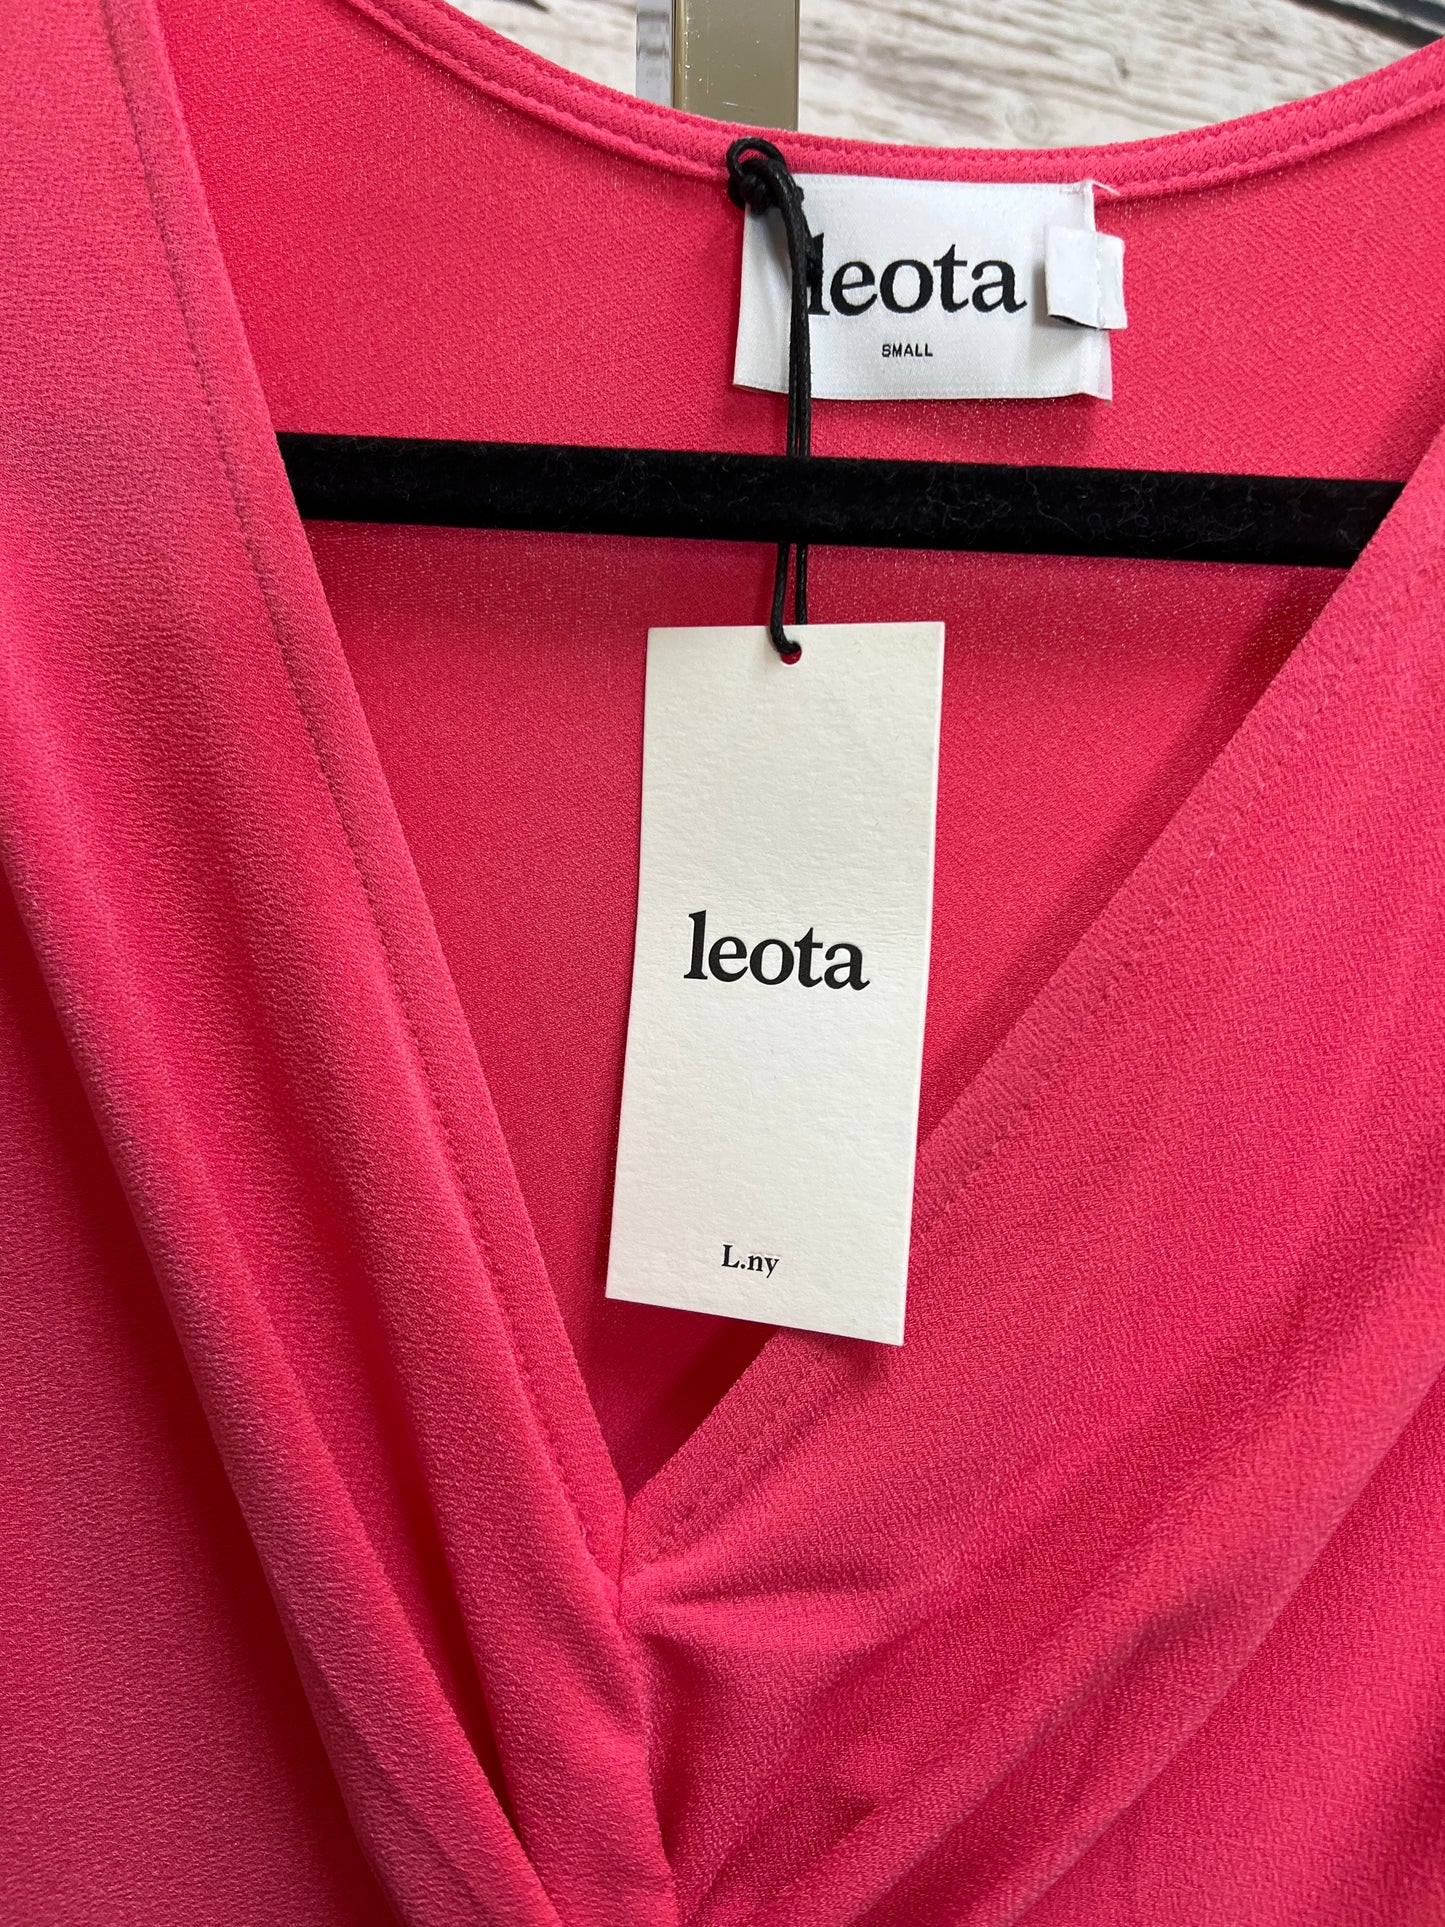 Dress Casual Short By Leota  Size: S